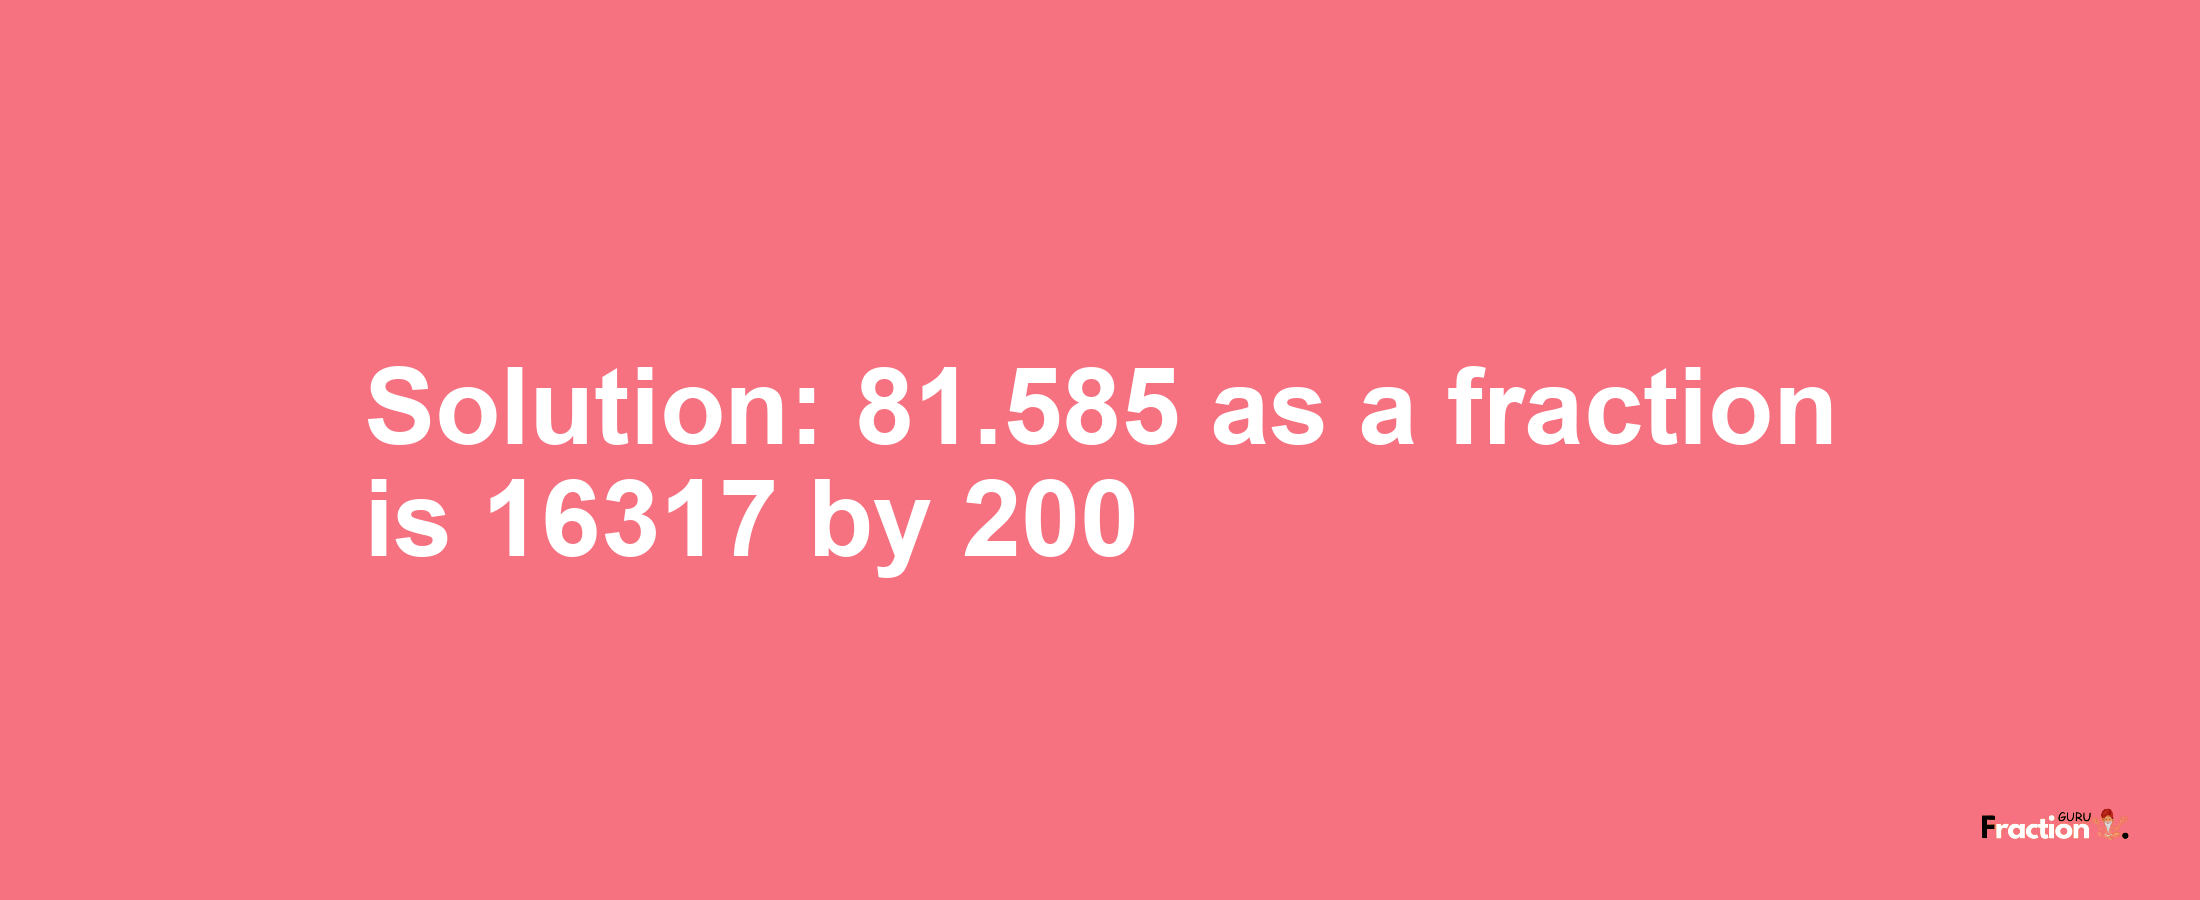 Solution:81.585 as a fraction is 16317/200